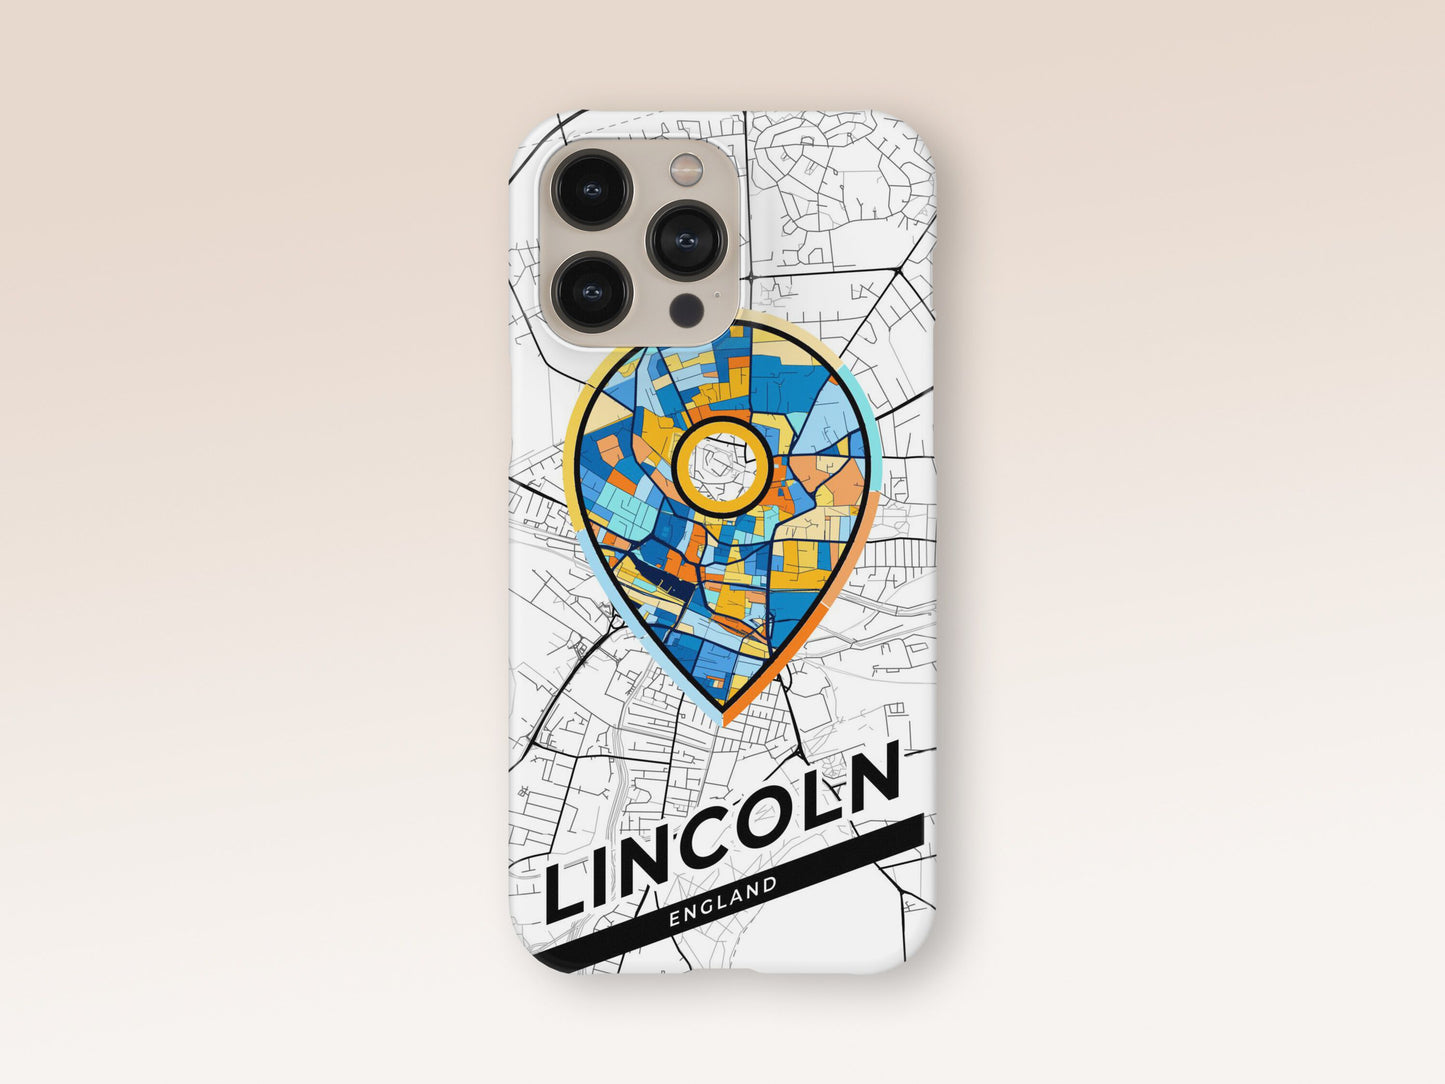 Lincoln England slim phone case with colorful icon. Birthday, wedding or housewarming gift. Couple match cases. 1